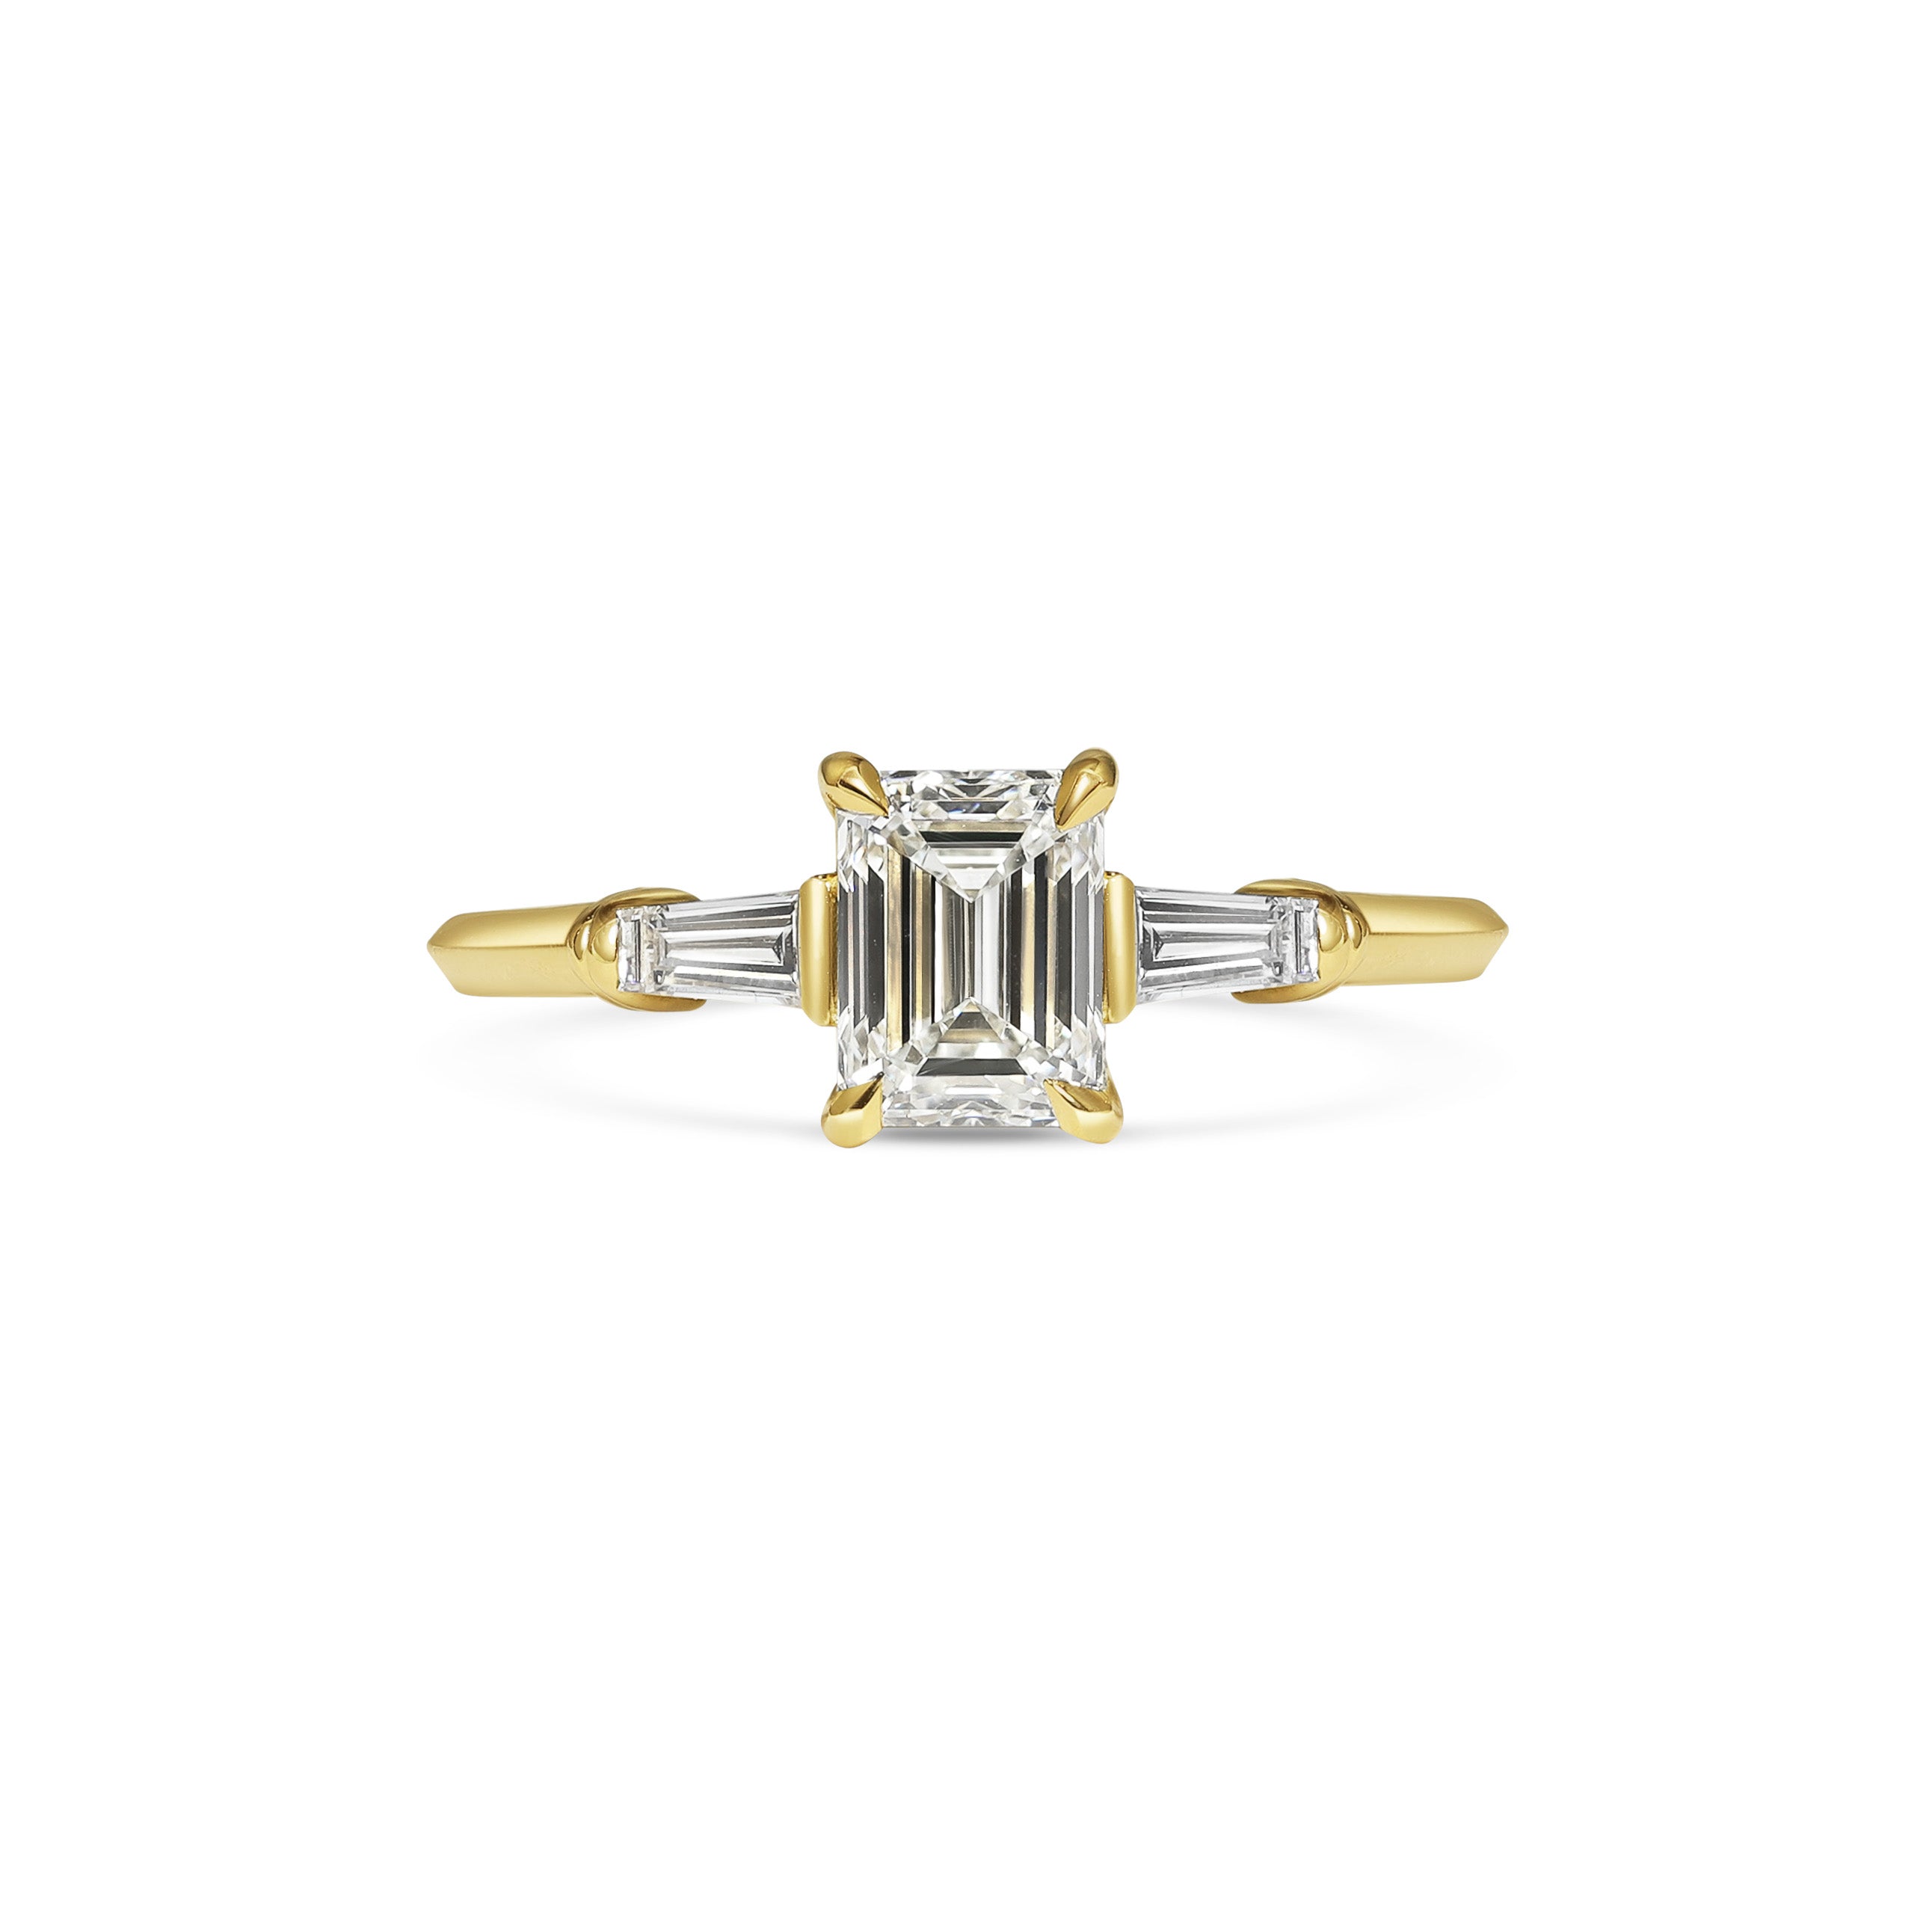 The Bette Ring - Emerald Cut 0.90ct - In Stock by East London jeweller Rachel Boston | Discover our collections of unique and timeless engagement rings, wedding rings, and modern fine jewellery.